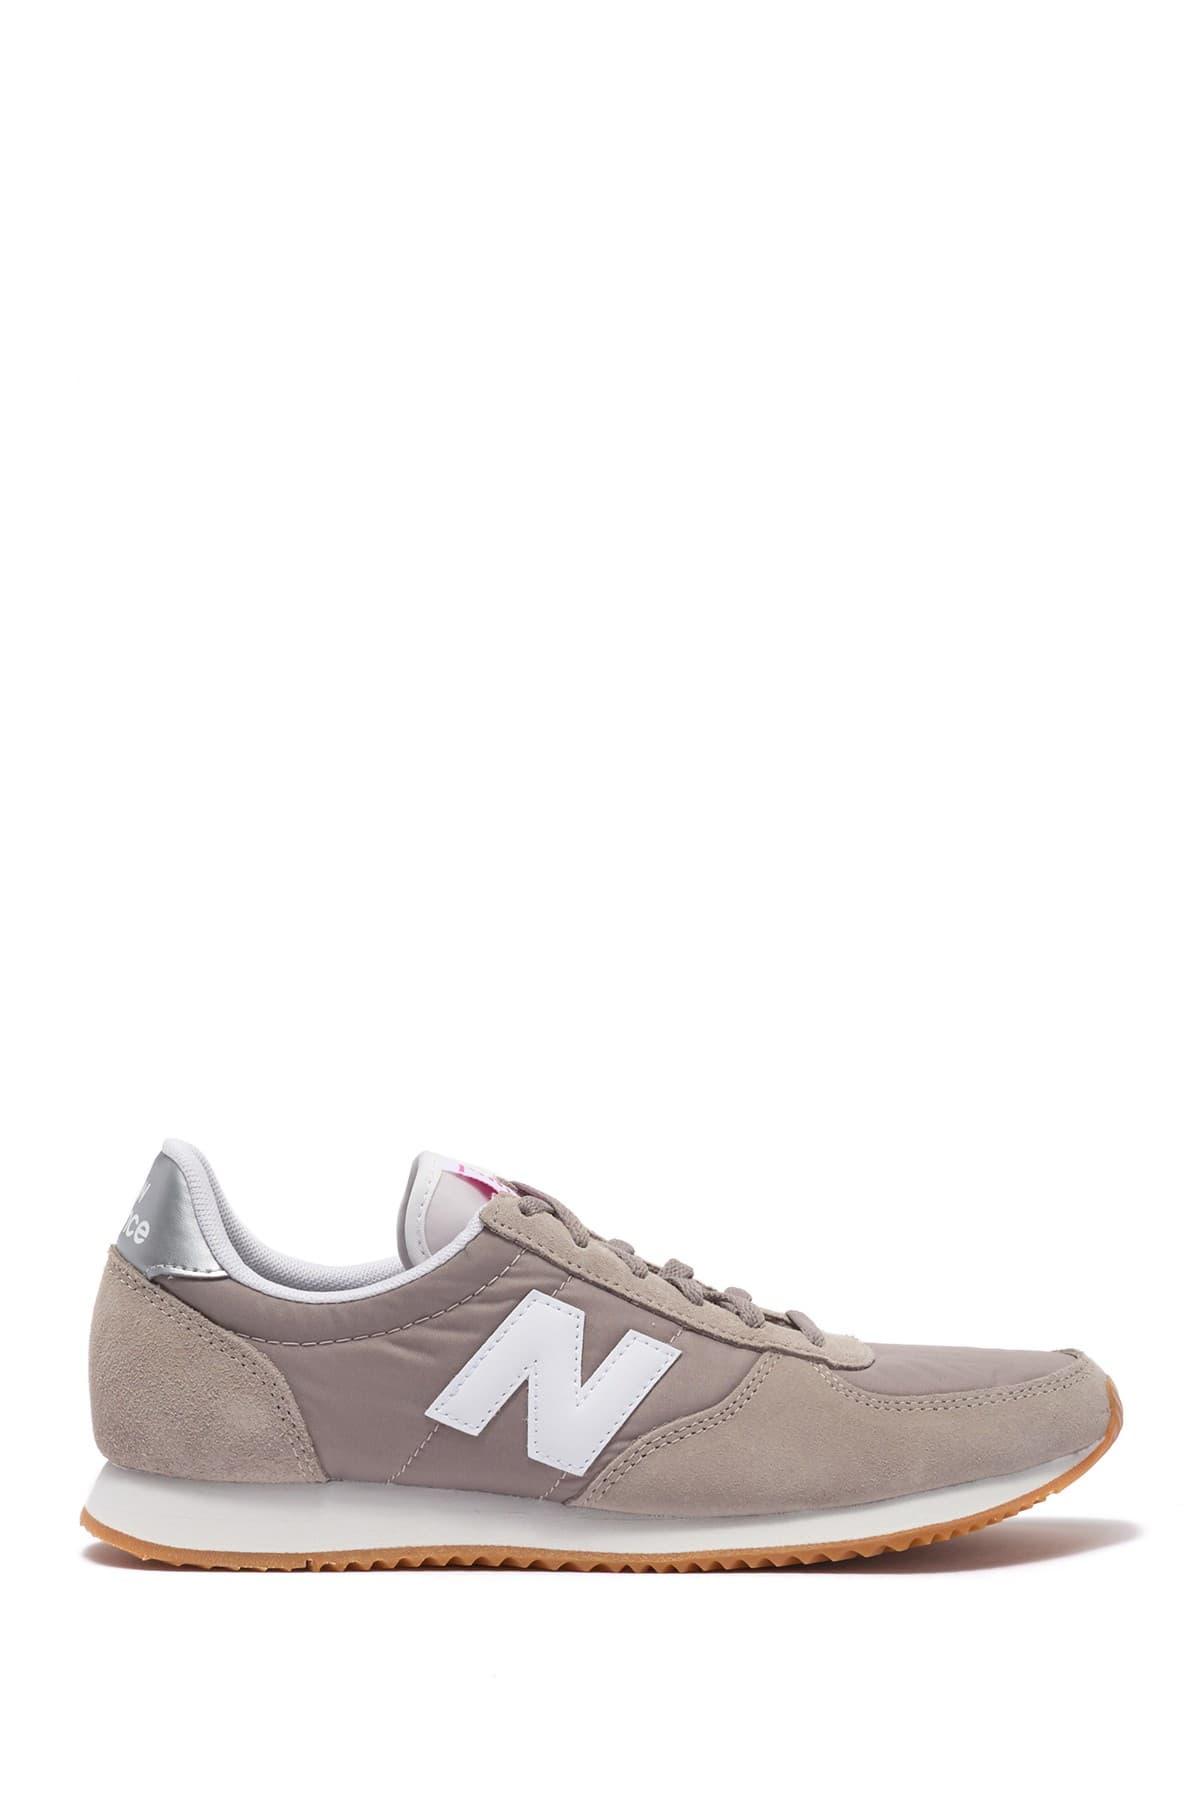 New Balance Synthetic 220 Classic V1 Sneaker in Grey/White (Gray) - Lyst